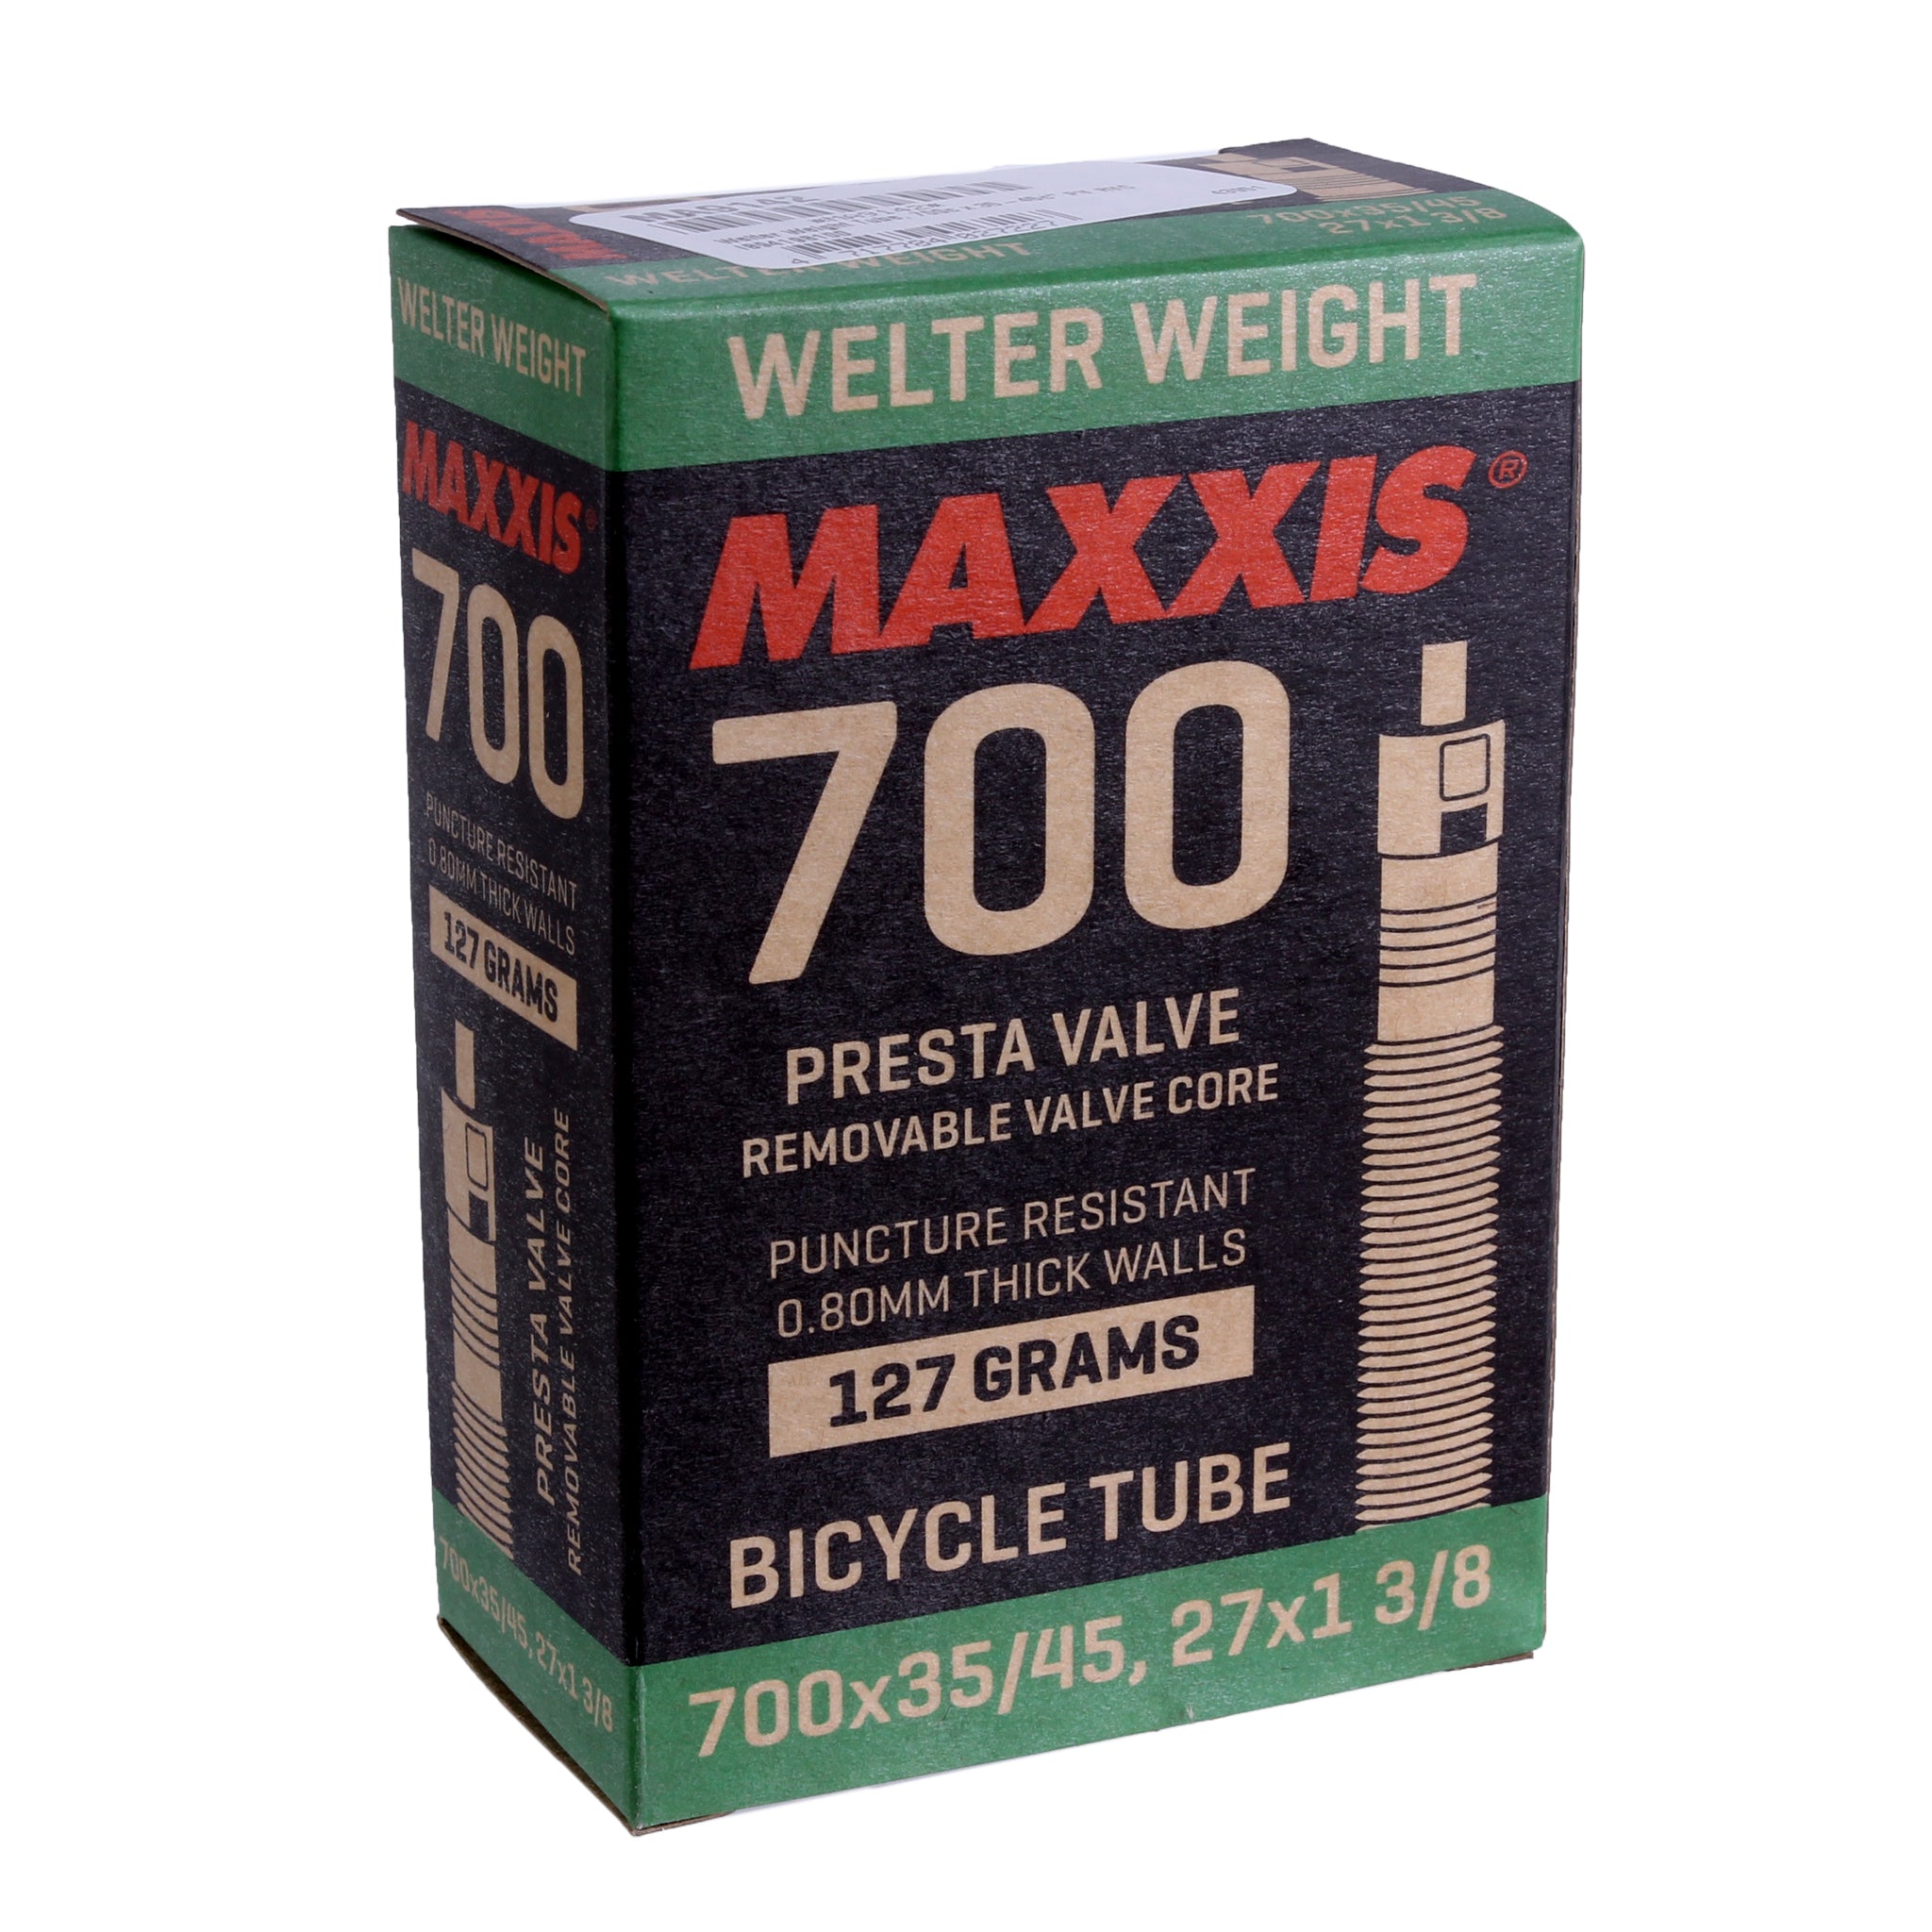 Maxxis Welter Weight Tube 700x33-50c PV 48mm RVC